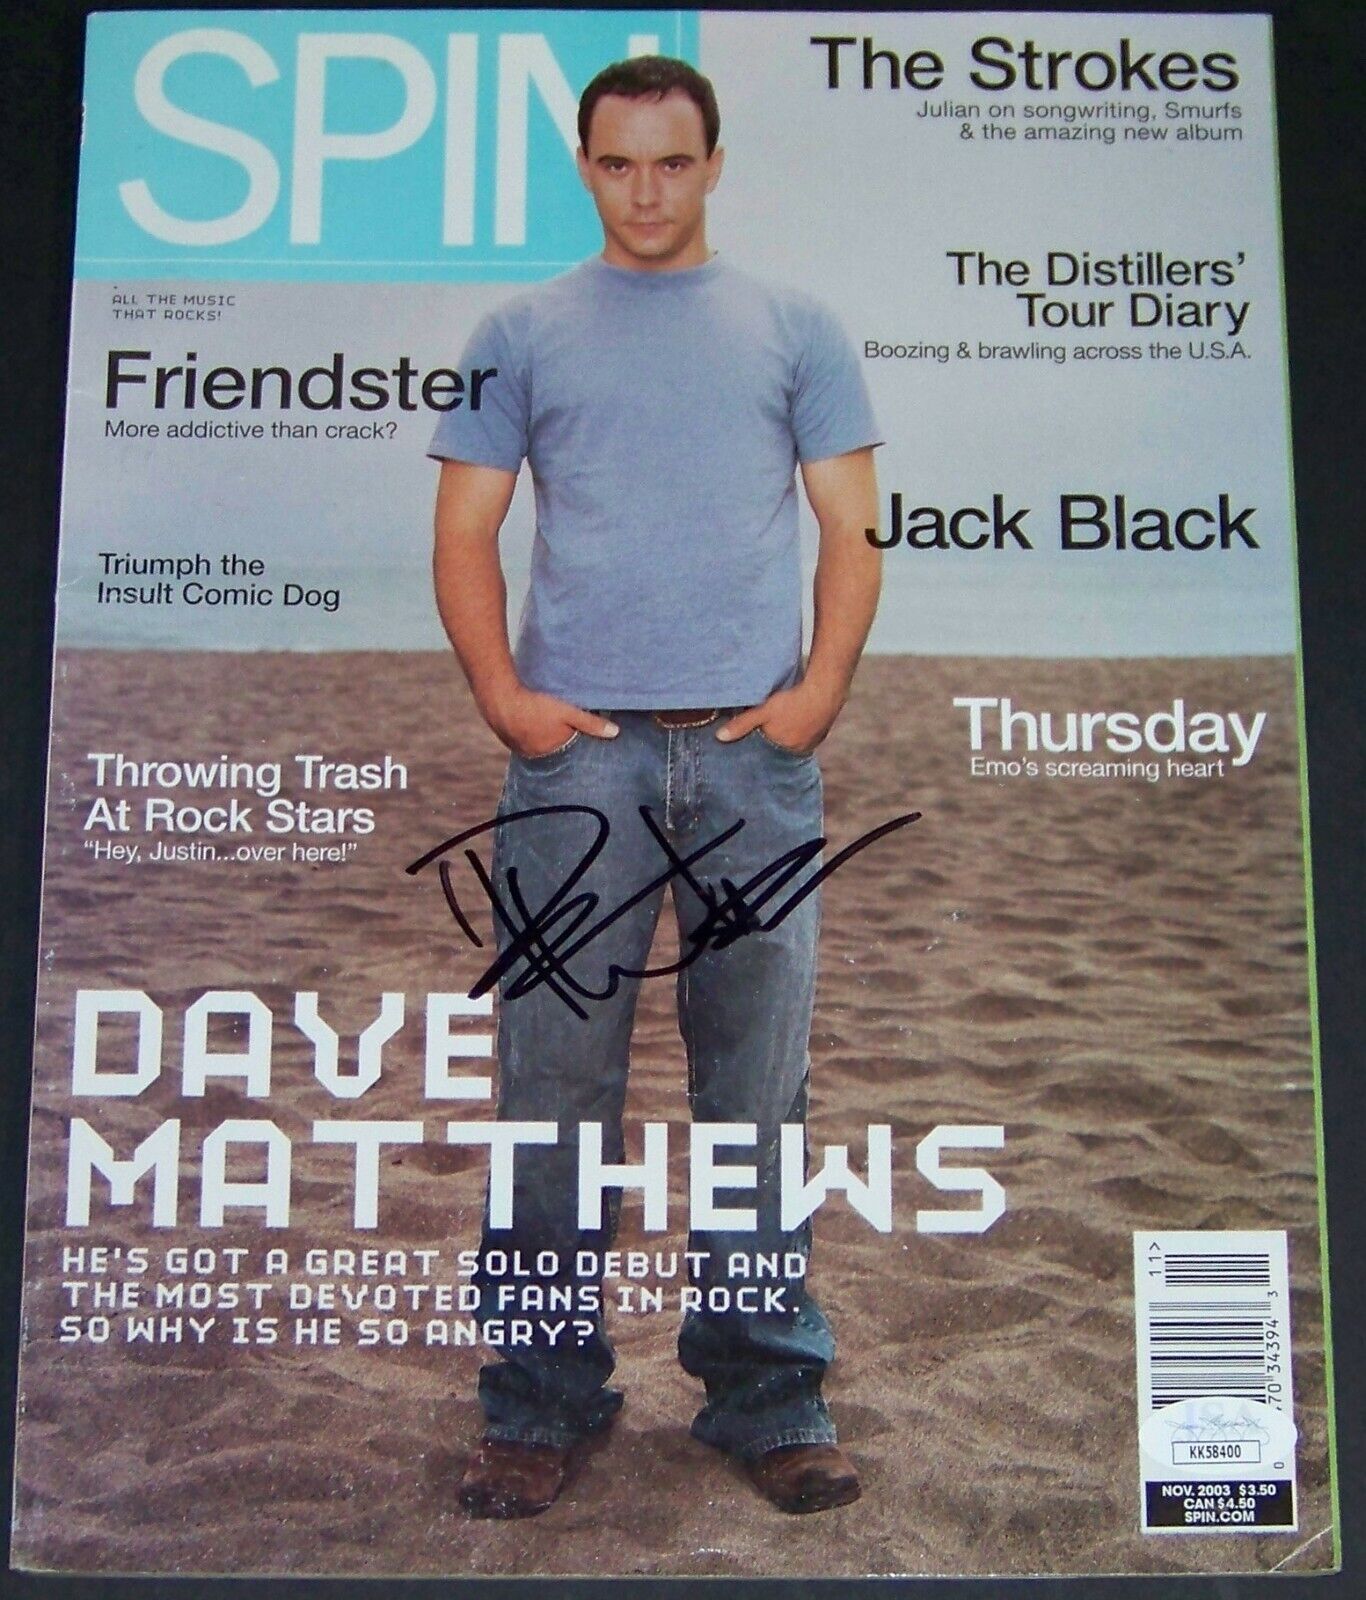 RARE EARLY FULL AUTO! Dave Matthews Signed Autographed Photo Poster painting Magazine JSA COA!